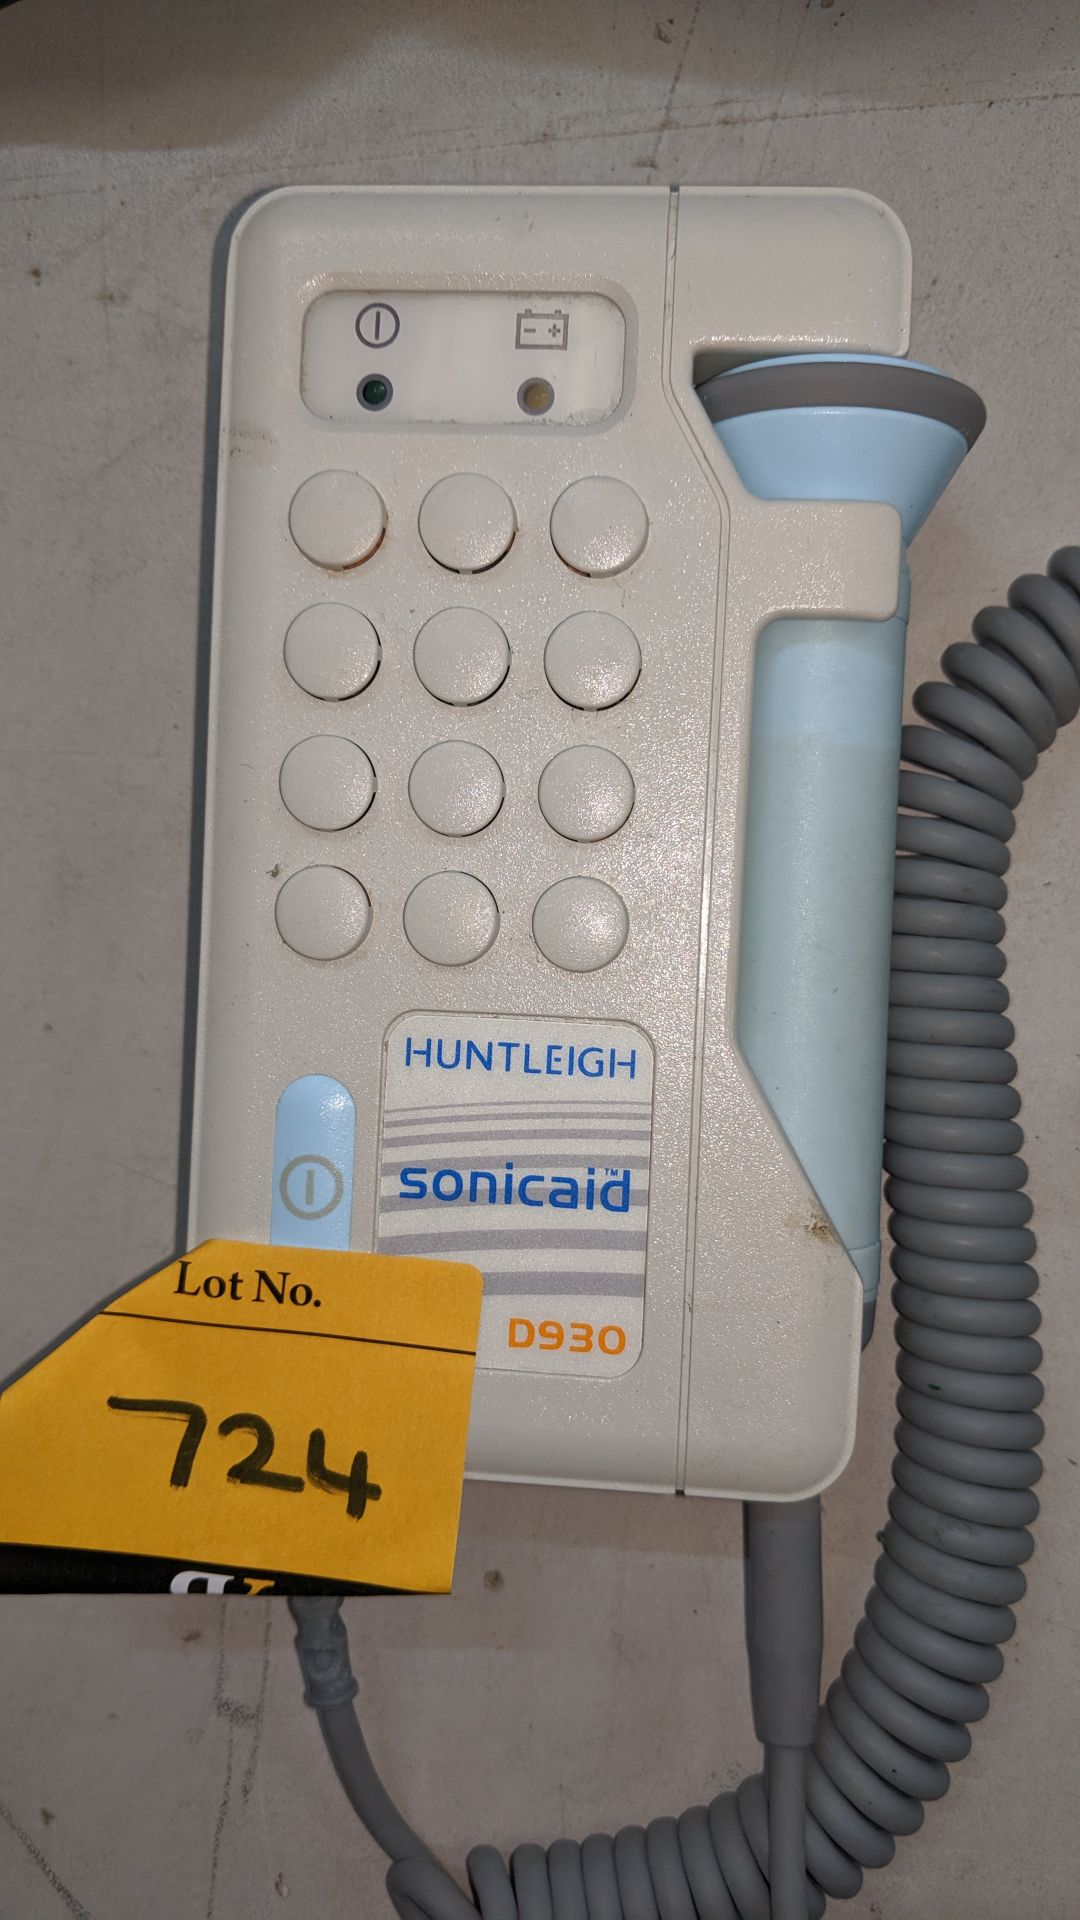 Huntleigh Sonicaid D930 Fetal Doppler tester. This is one of a large number of lots used/owned by - Image 3 of 4